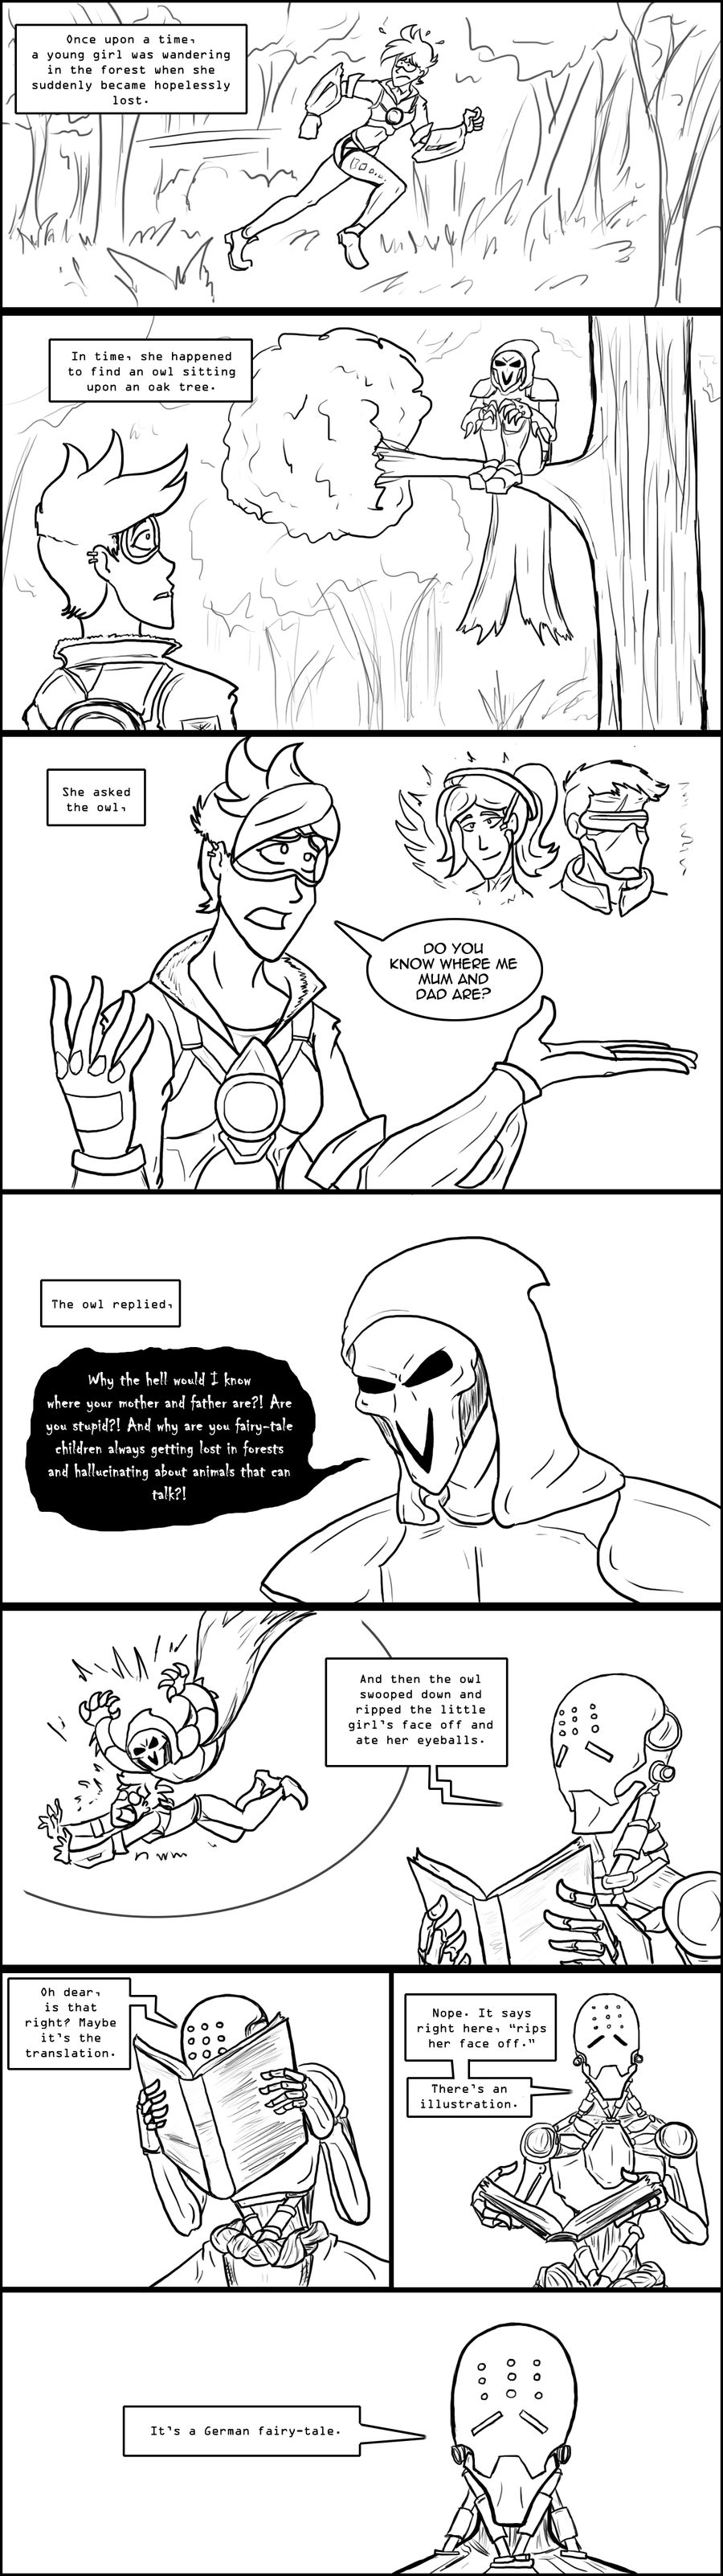 True Facts About the Reaper